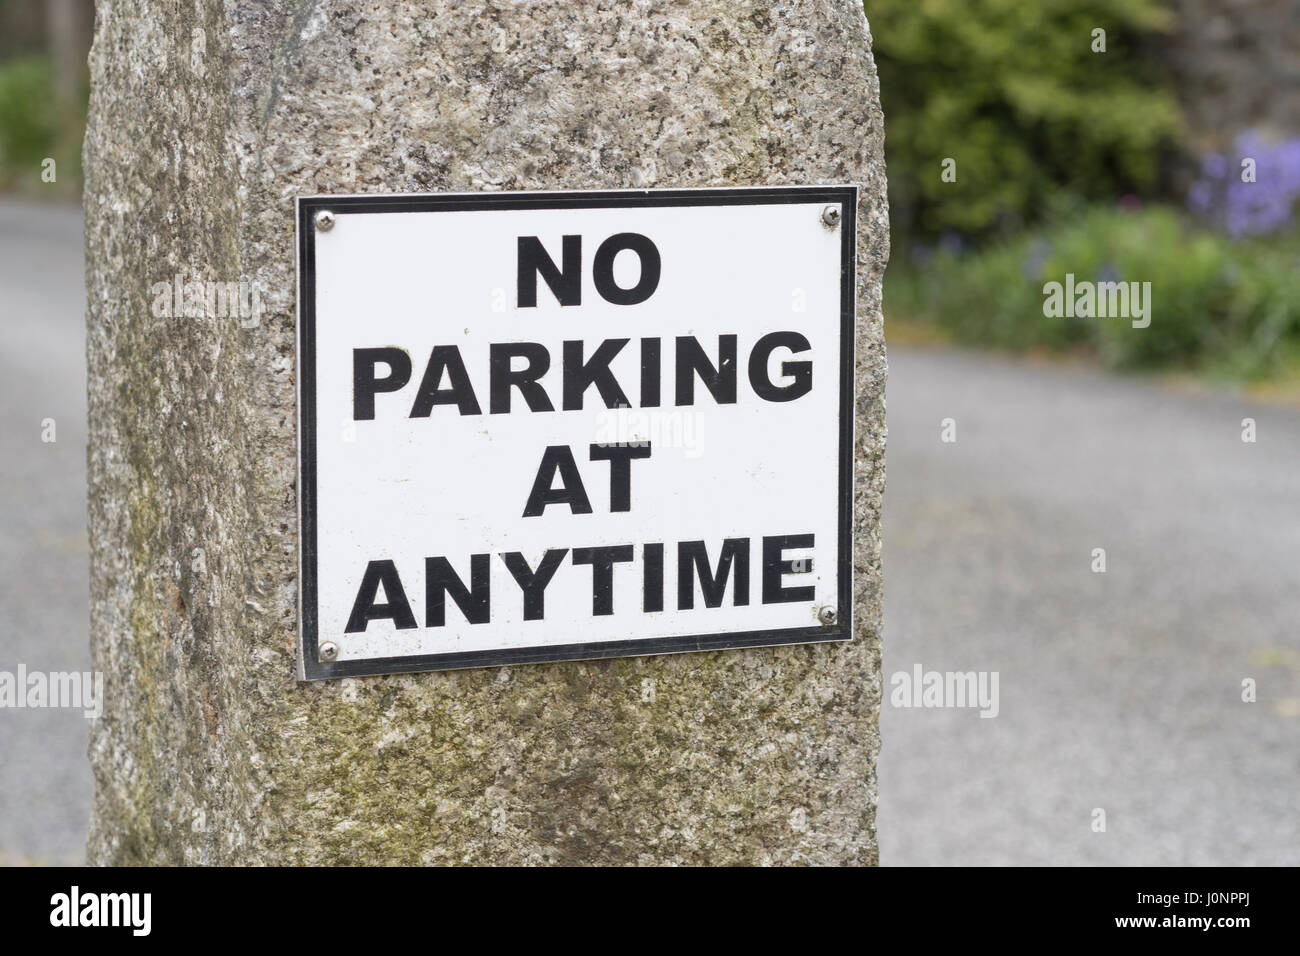 Small 'No Parking' sign - a visual metaphor for the concept of obeying the rules and control. Stock Photo